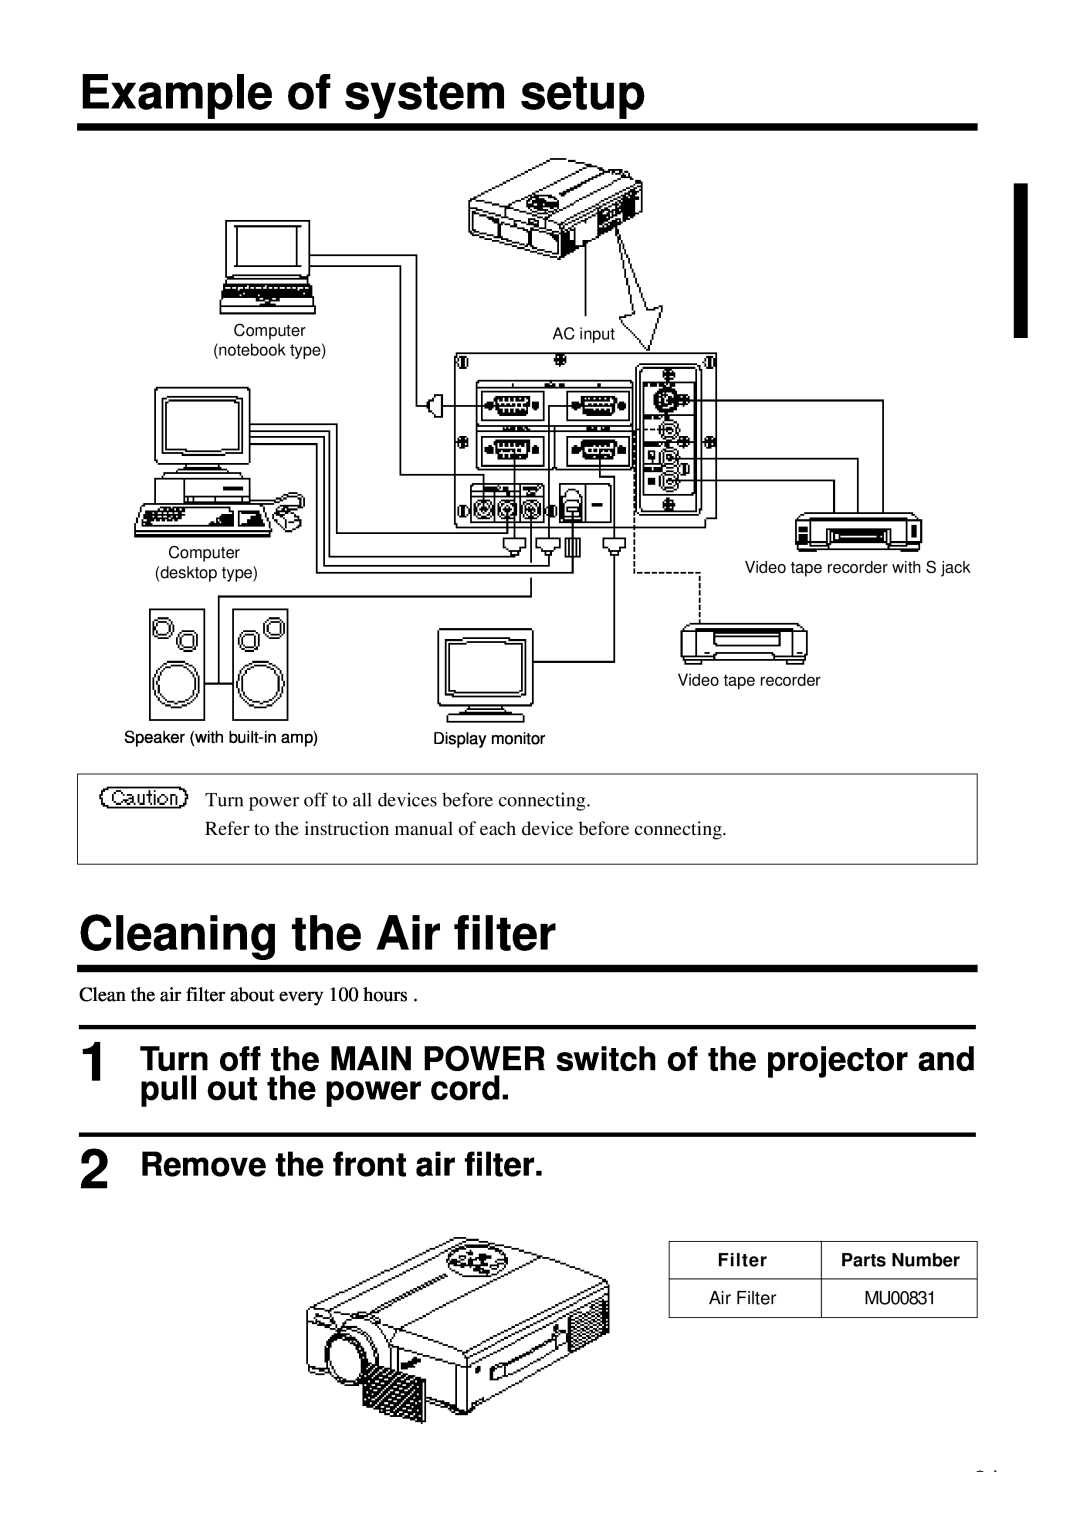 Polaroid PV 360 specifications Example of system setup, Cleaning the Air filter, Remove the front air filter, MU00831 